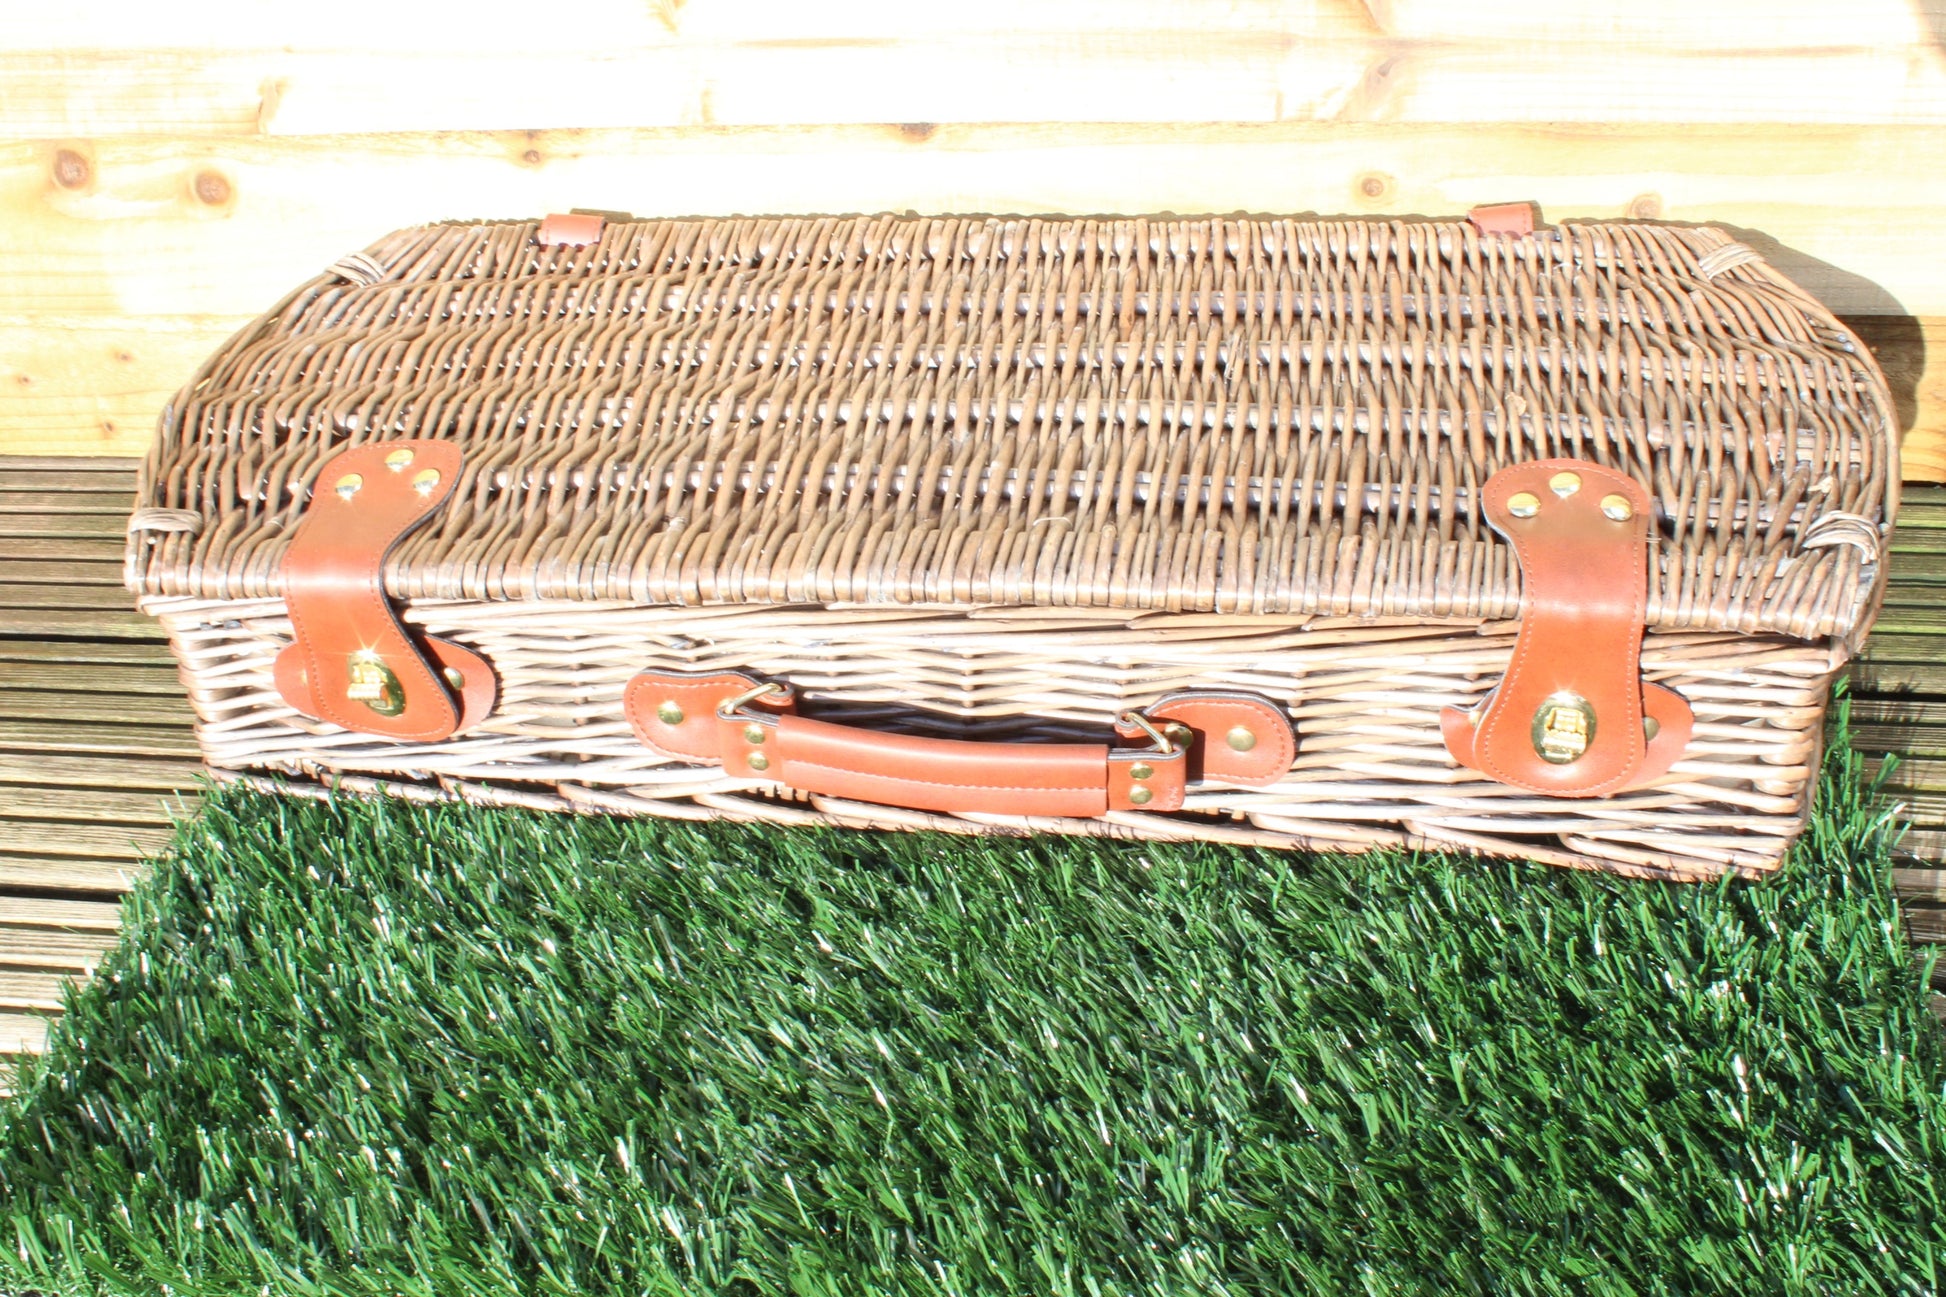 The sun shines in the case of Personalised Barbecue Tools that sit on faux grass.